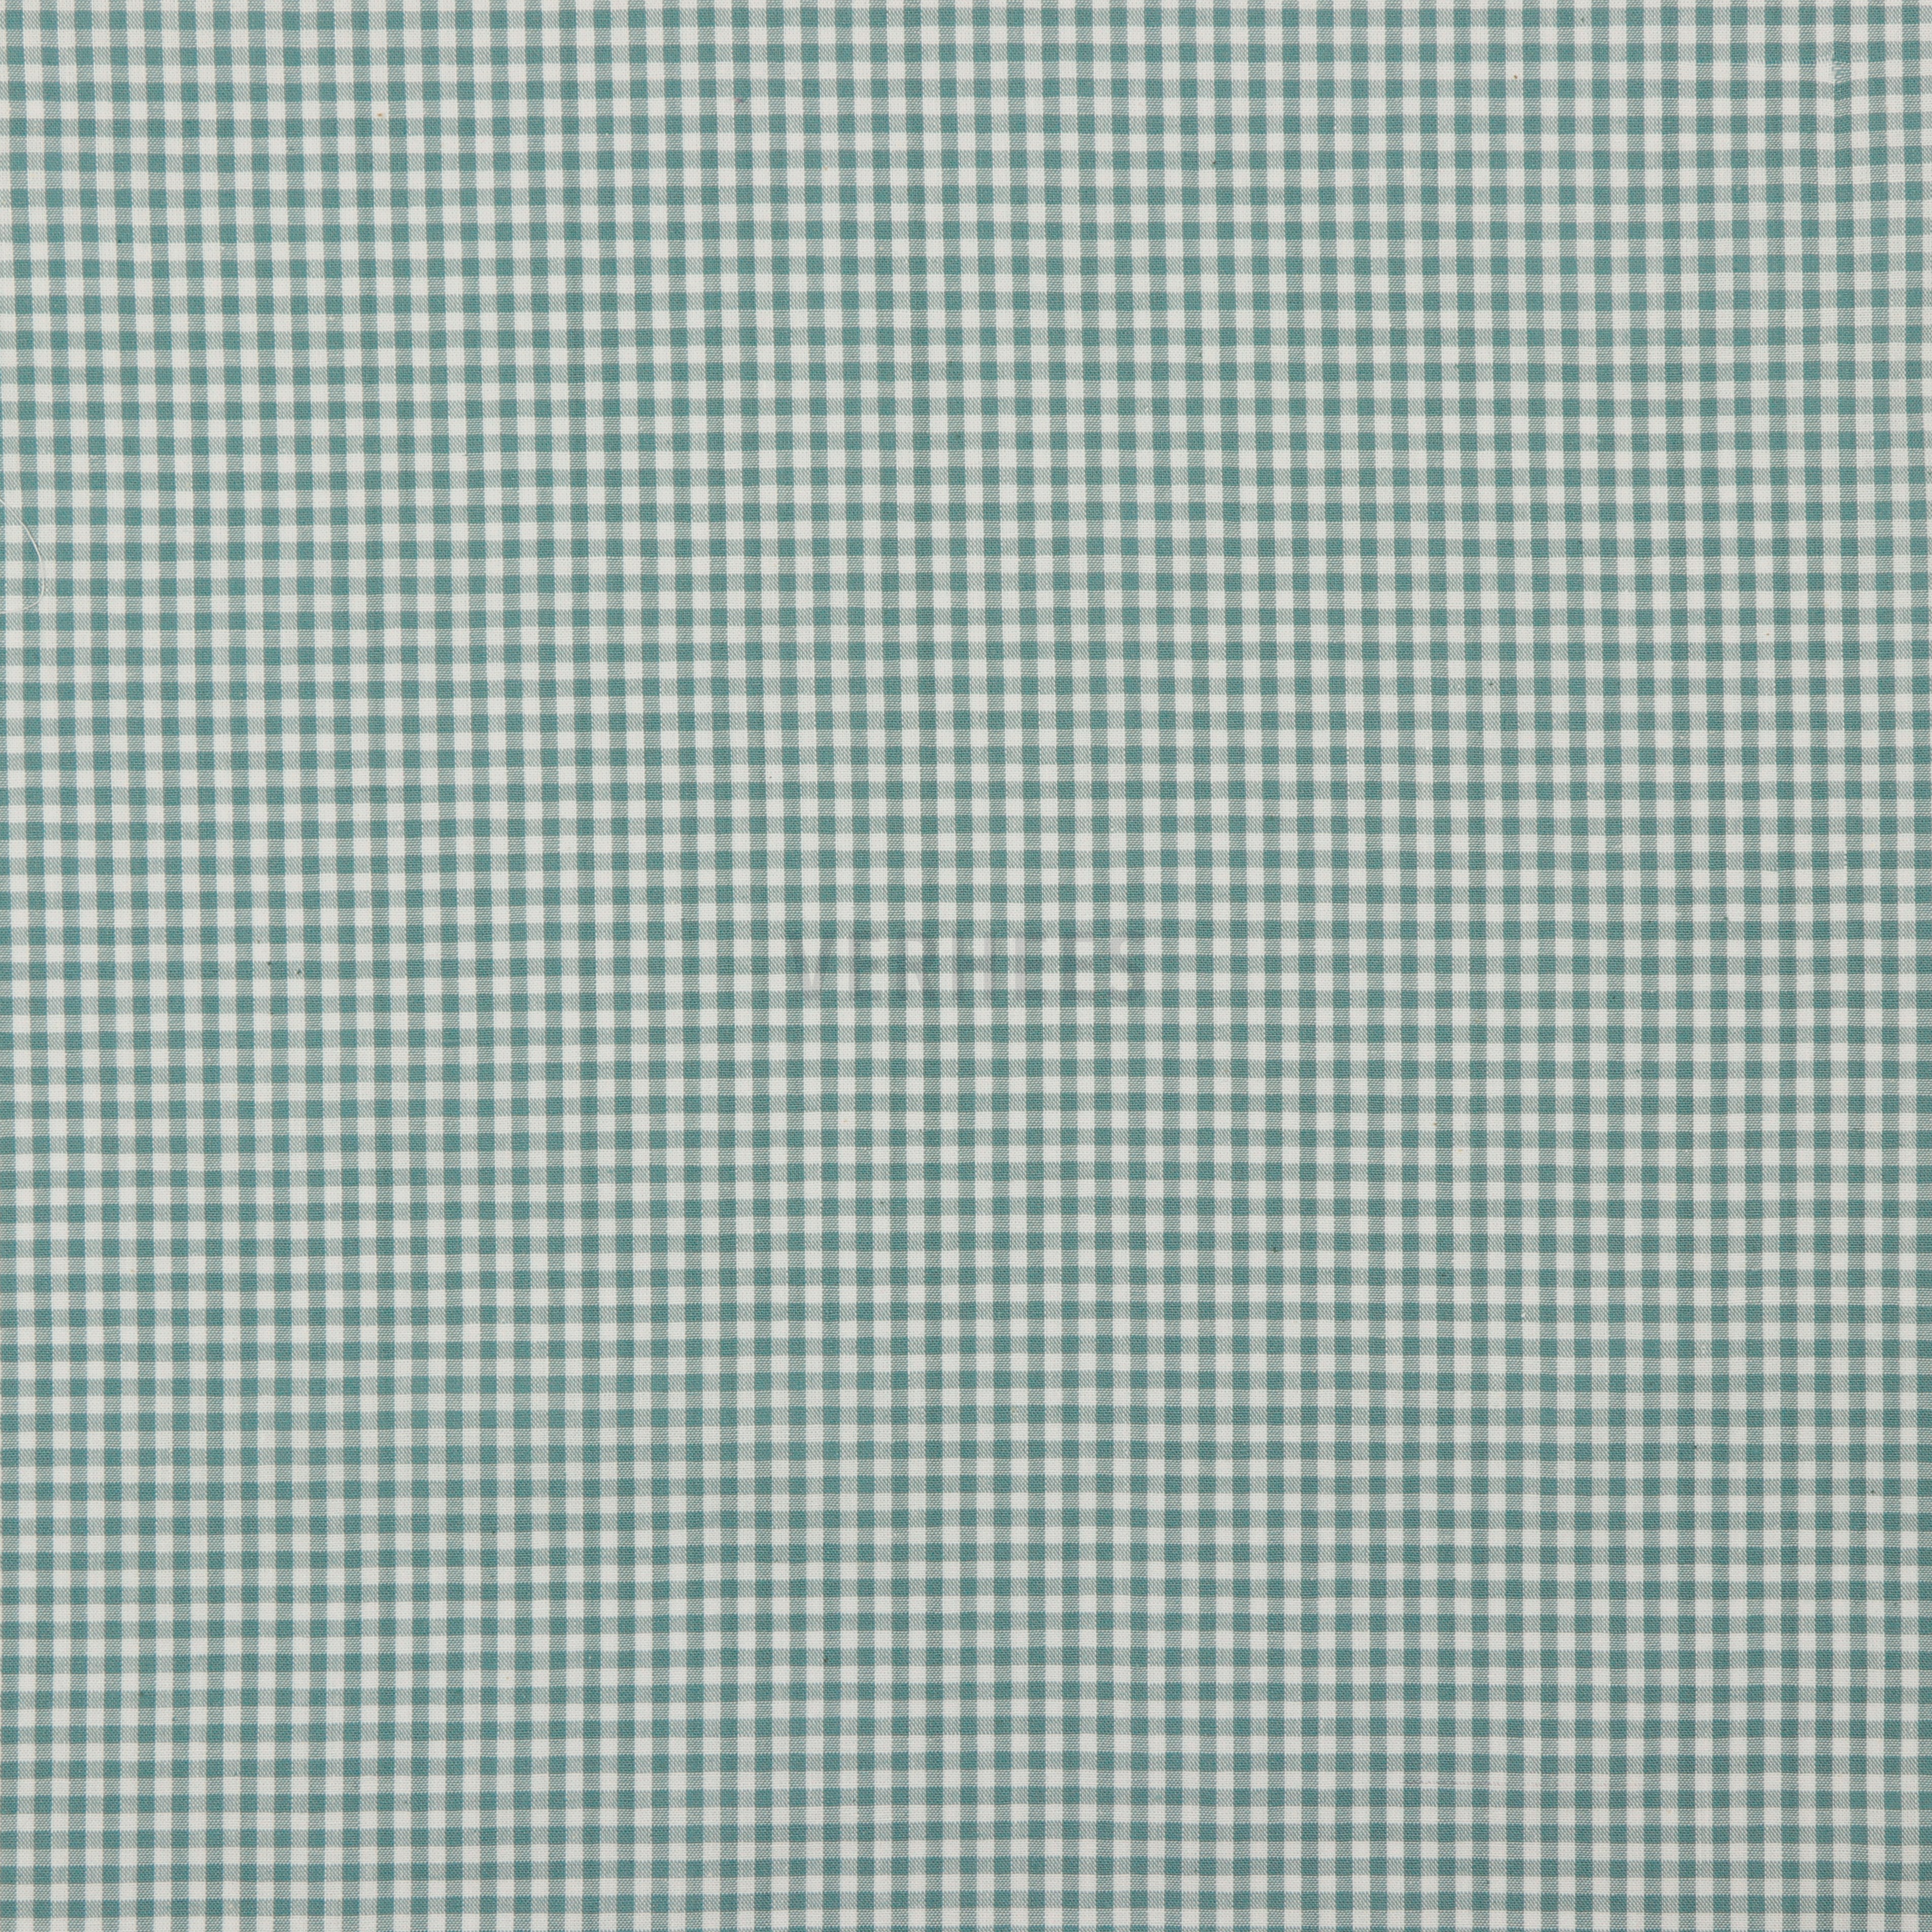 CHECK 2.7MM TEAL (high resolution)